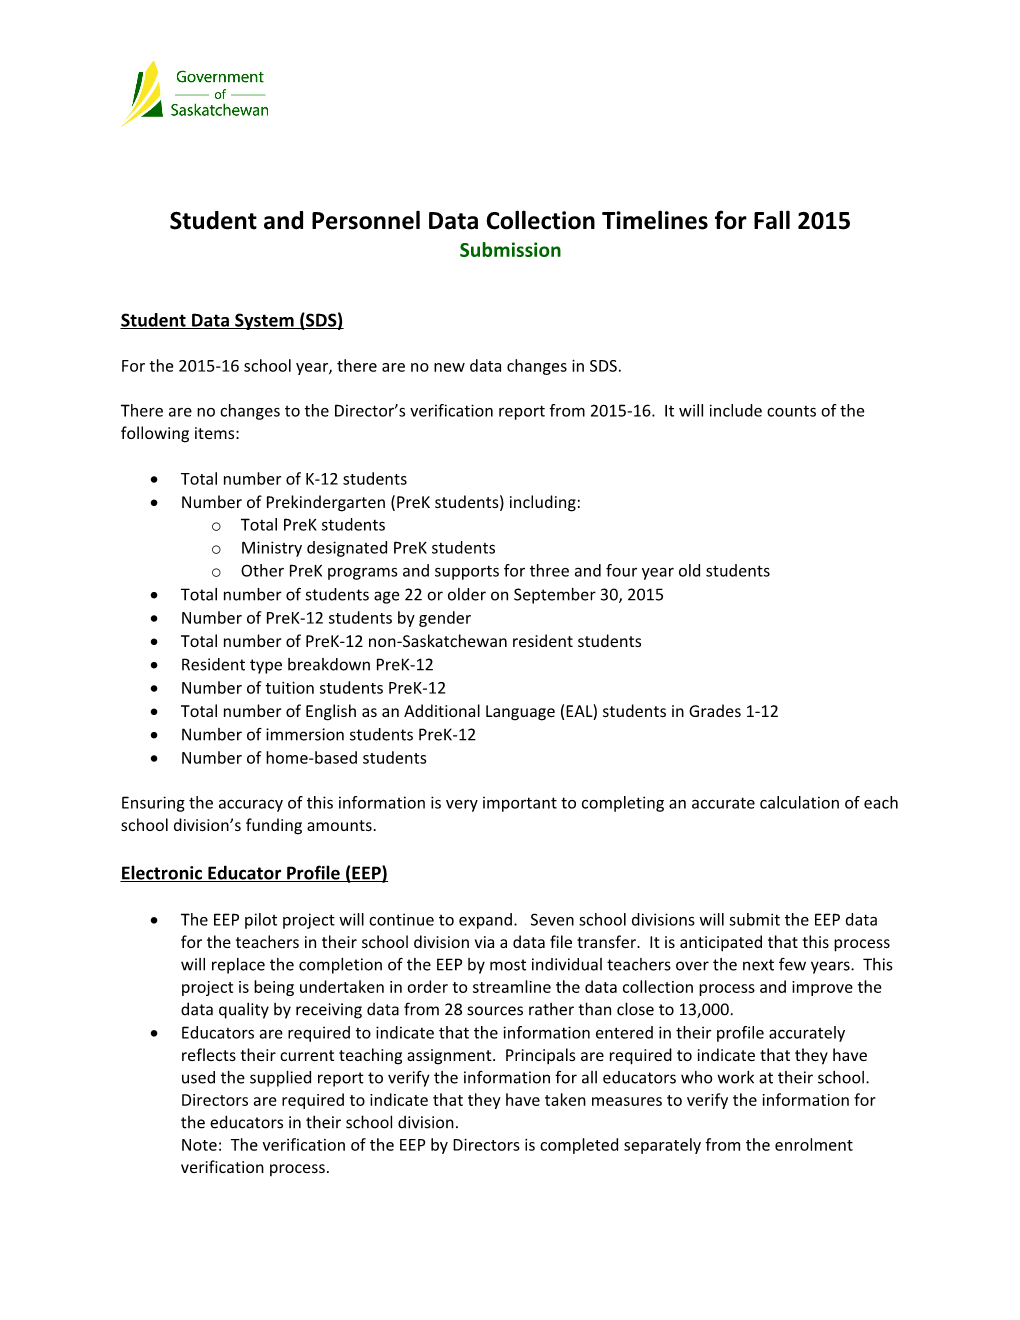 Student and Personnel Data Collection Timelines for Fall 2015